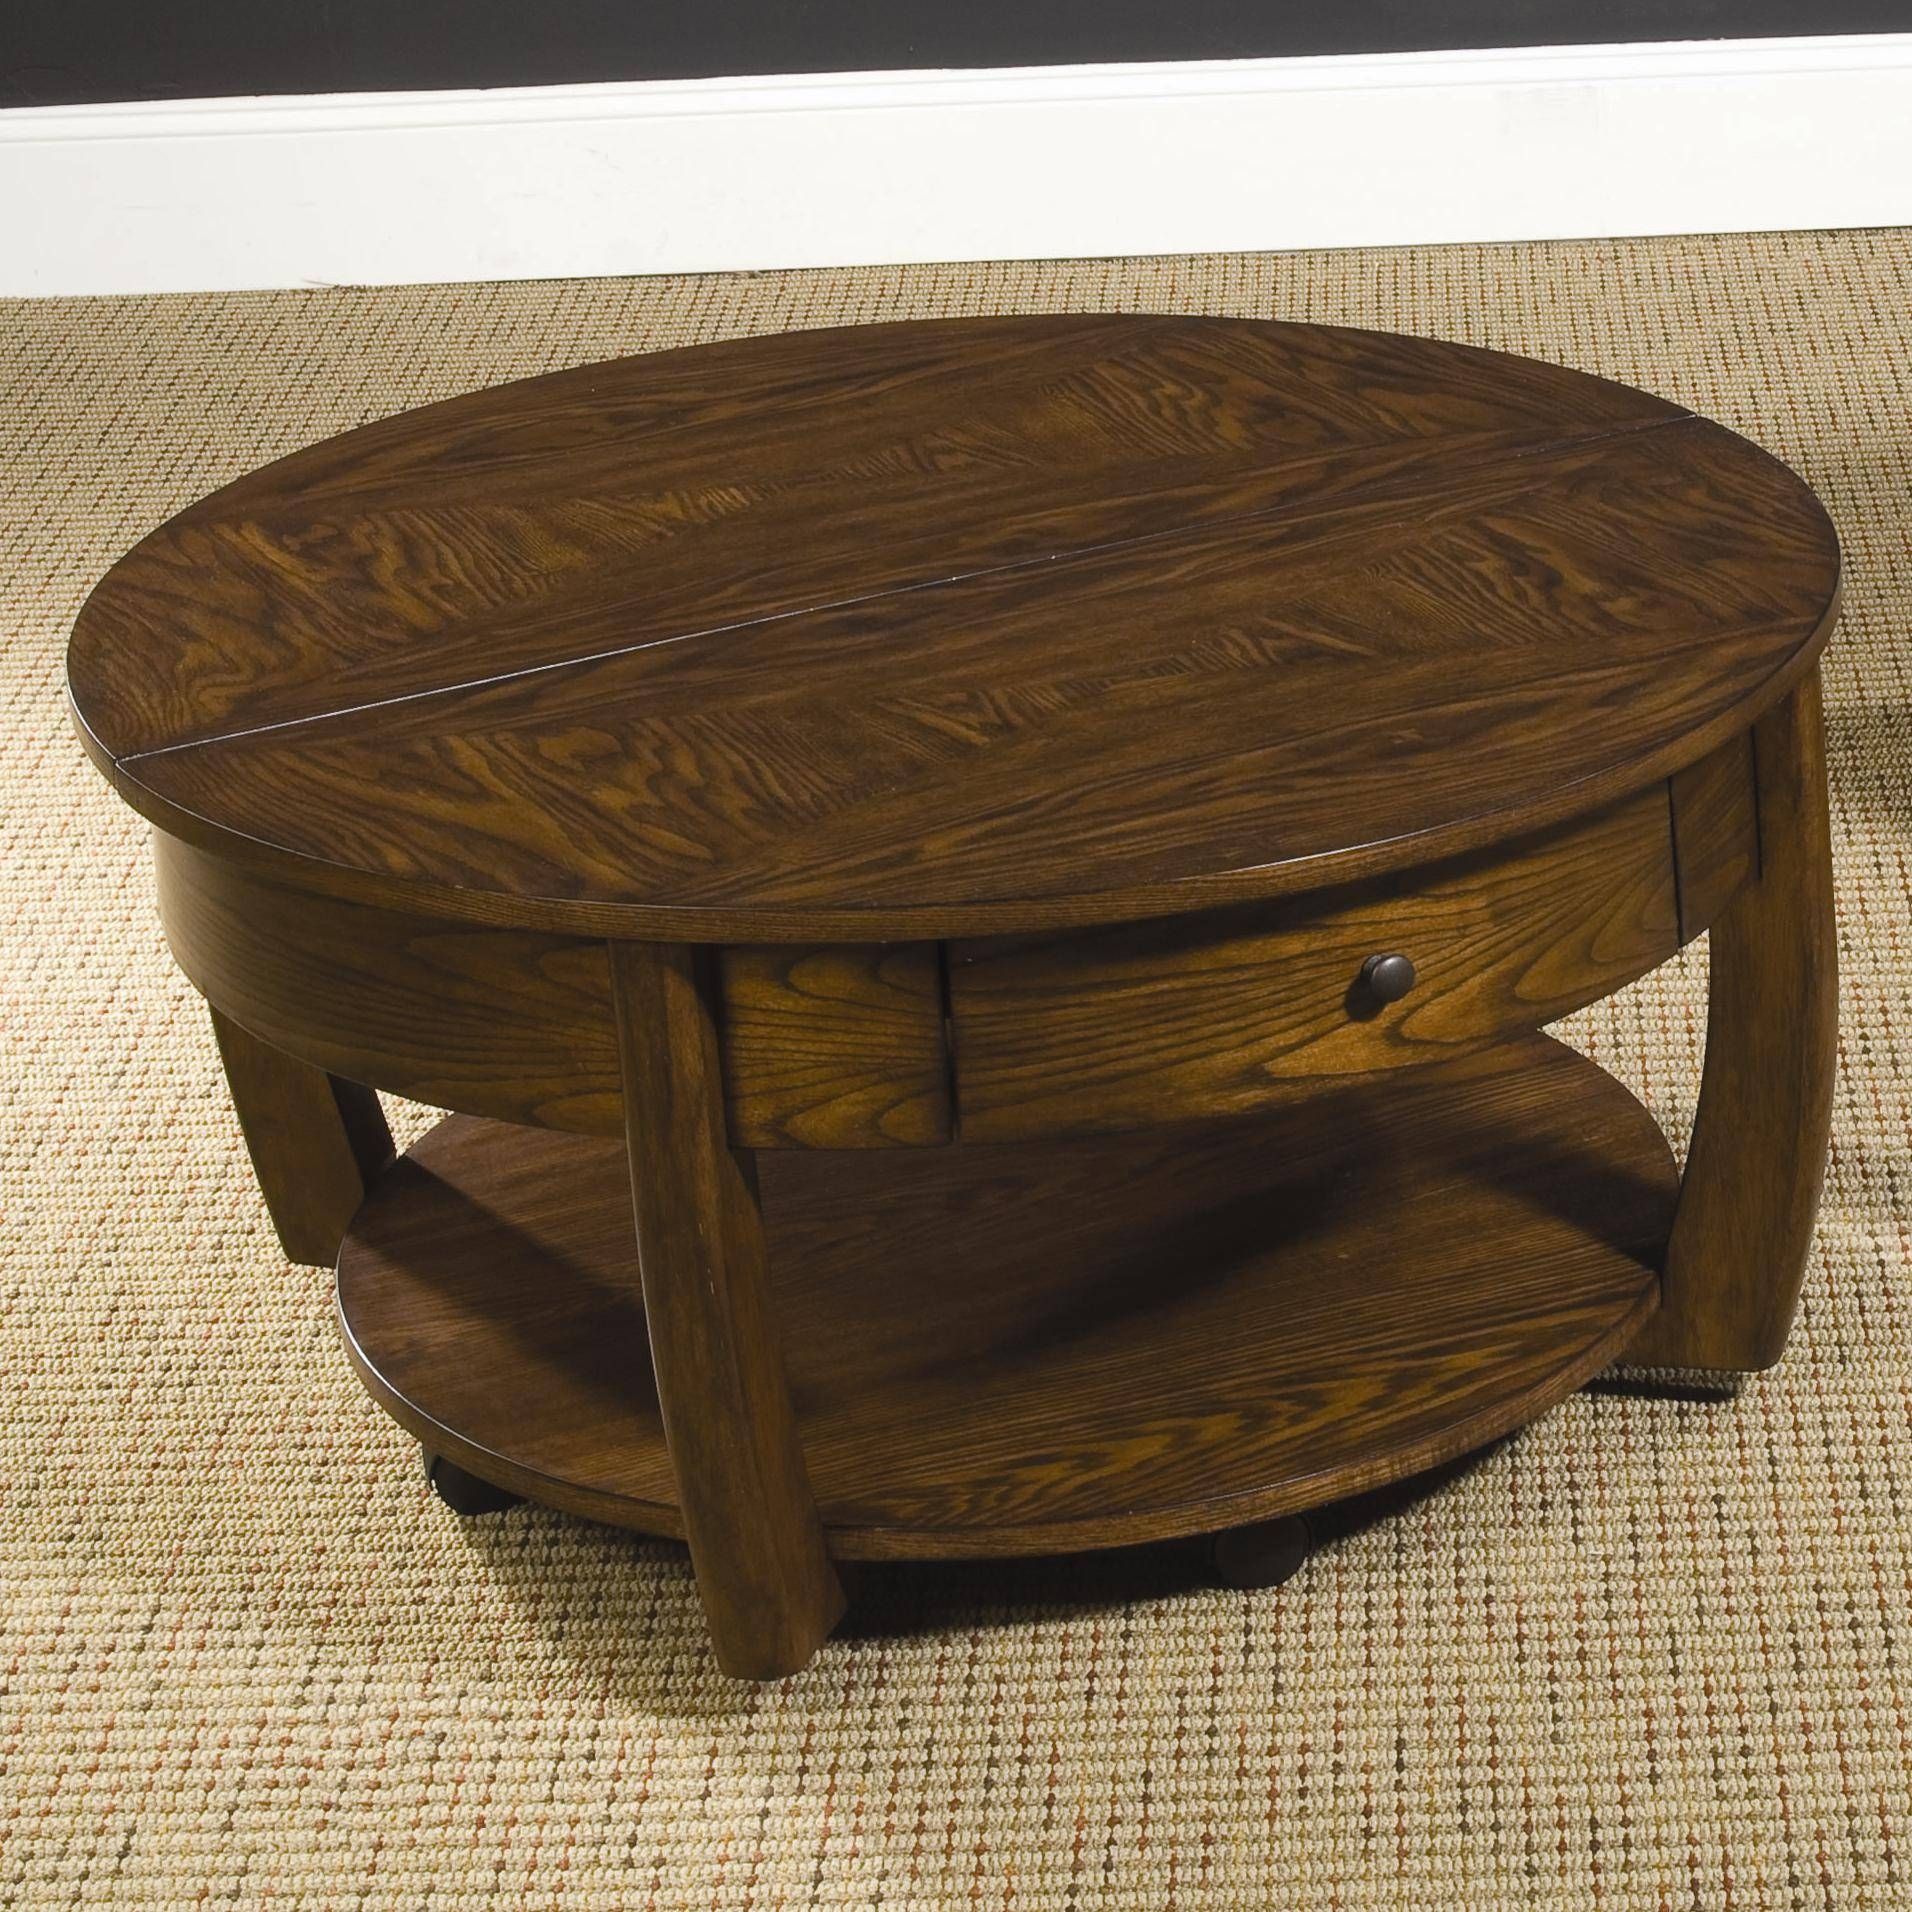 Round Lift Top Cocktail Table With Lower Shelf And Drawer Within Round Coffee Tables With Drawers (View 8 of 30)